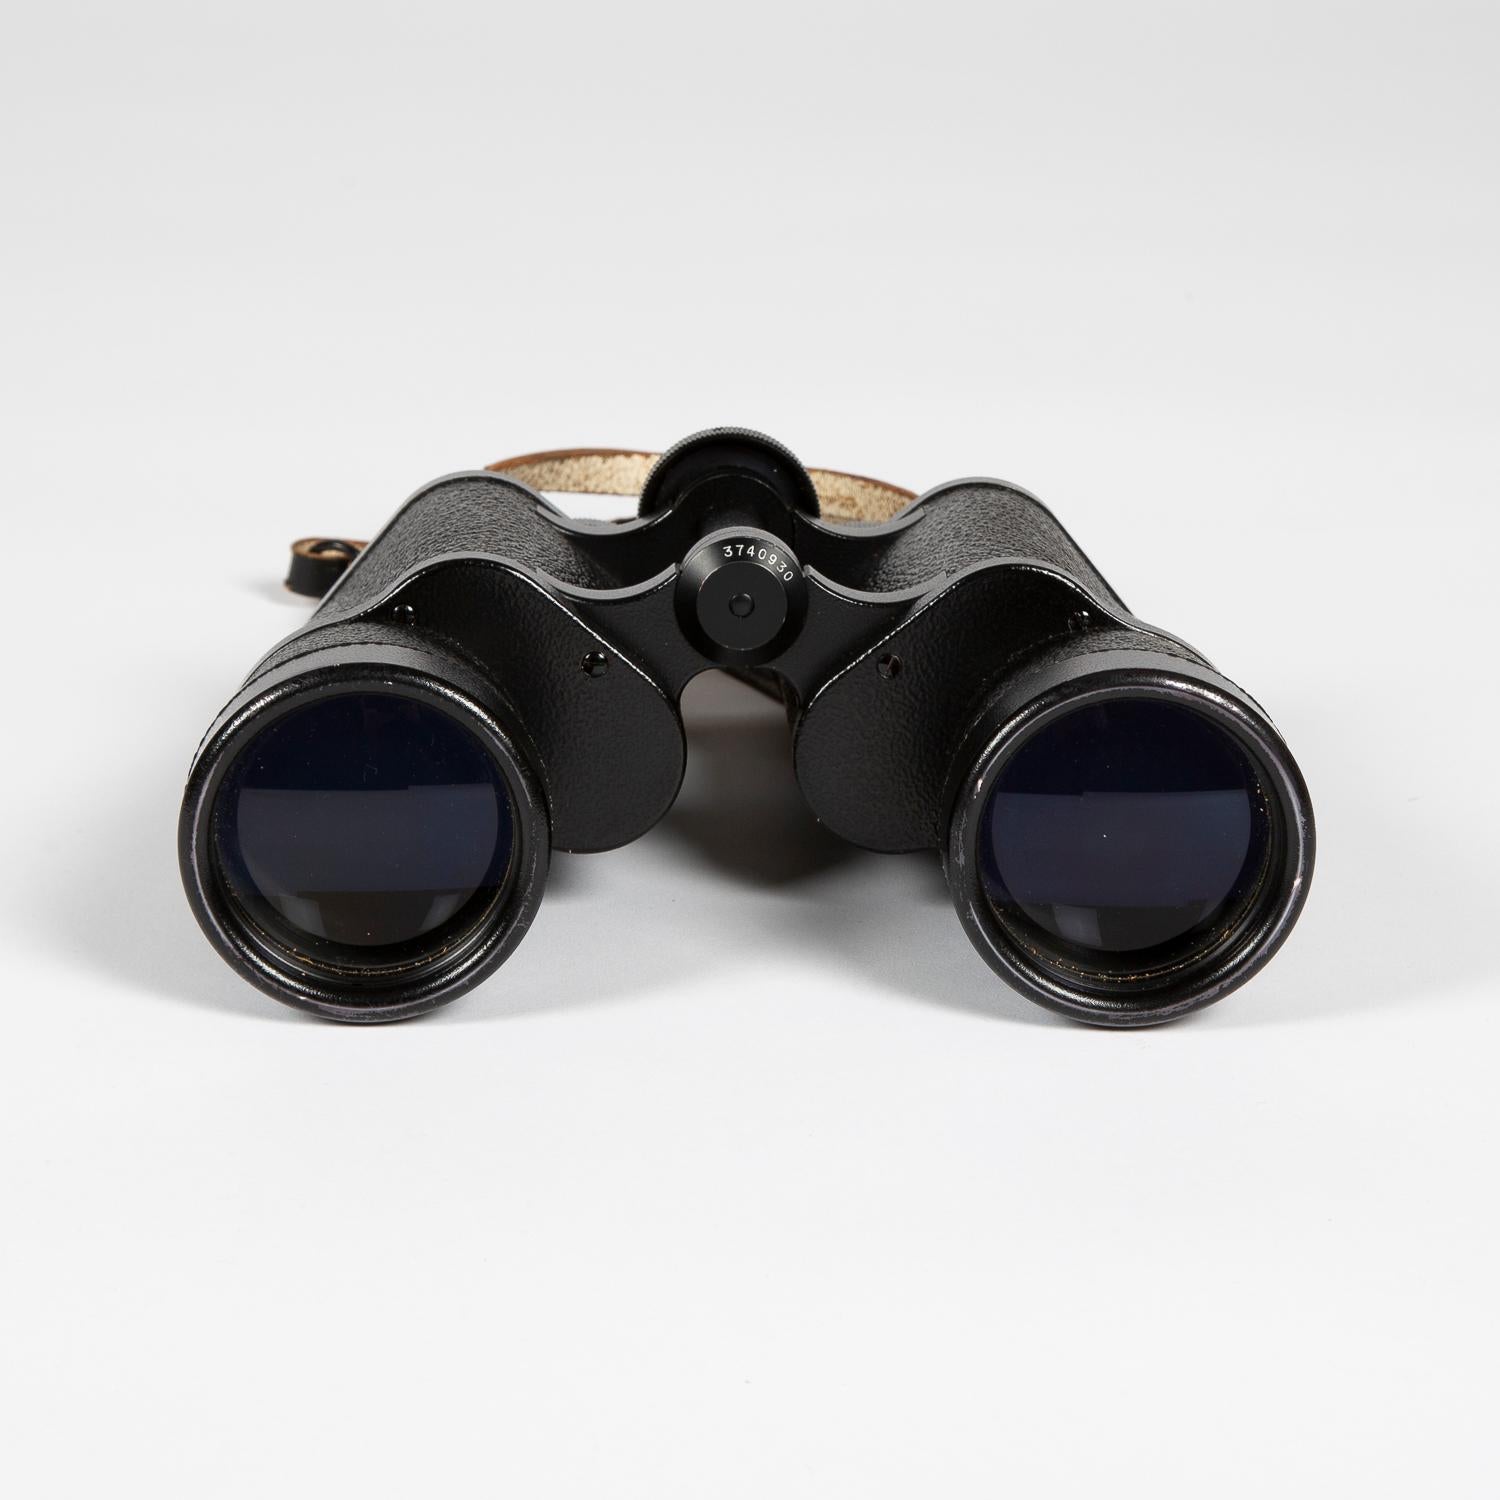 A pair of Carl Zeiss Jena 7 x 50 